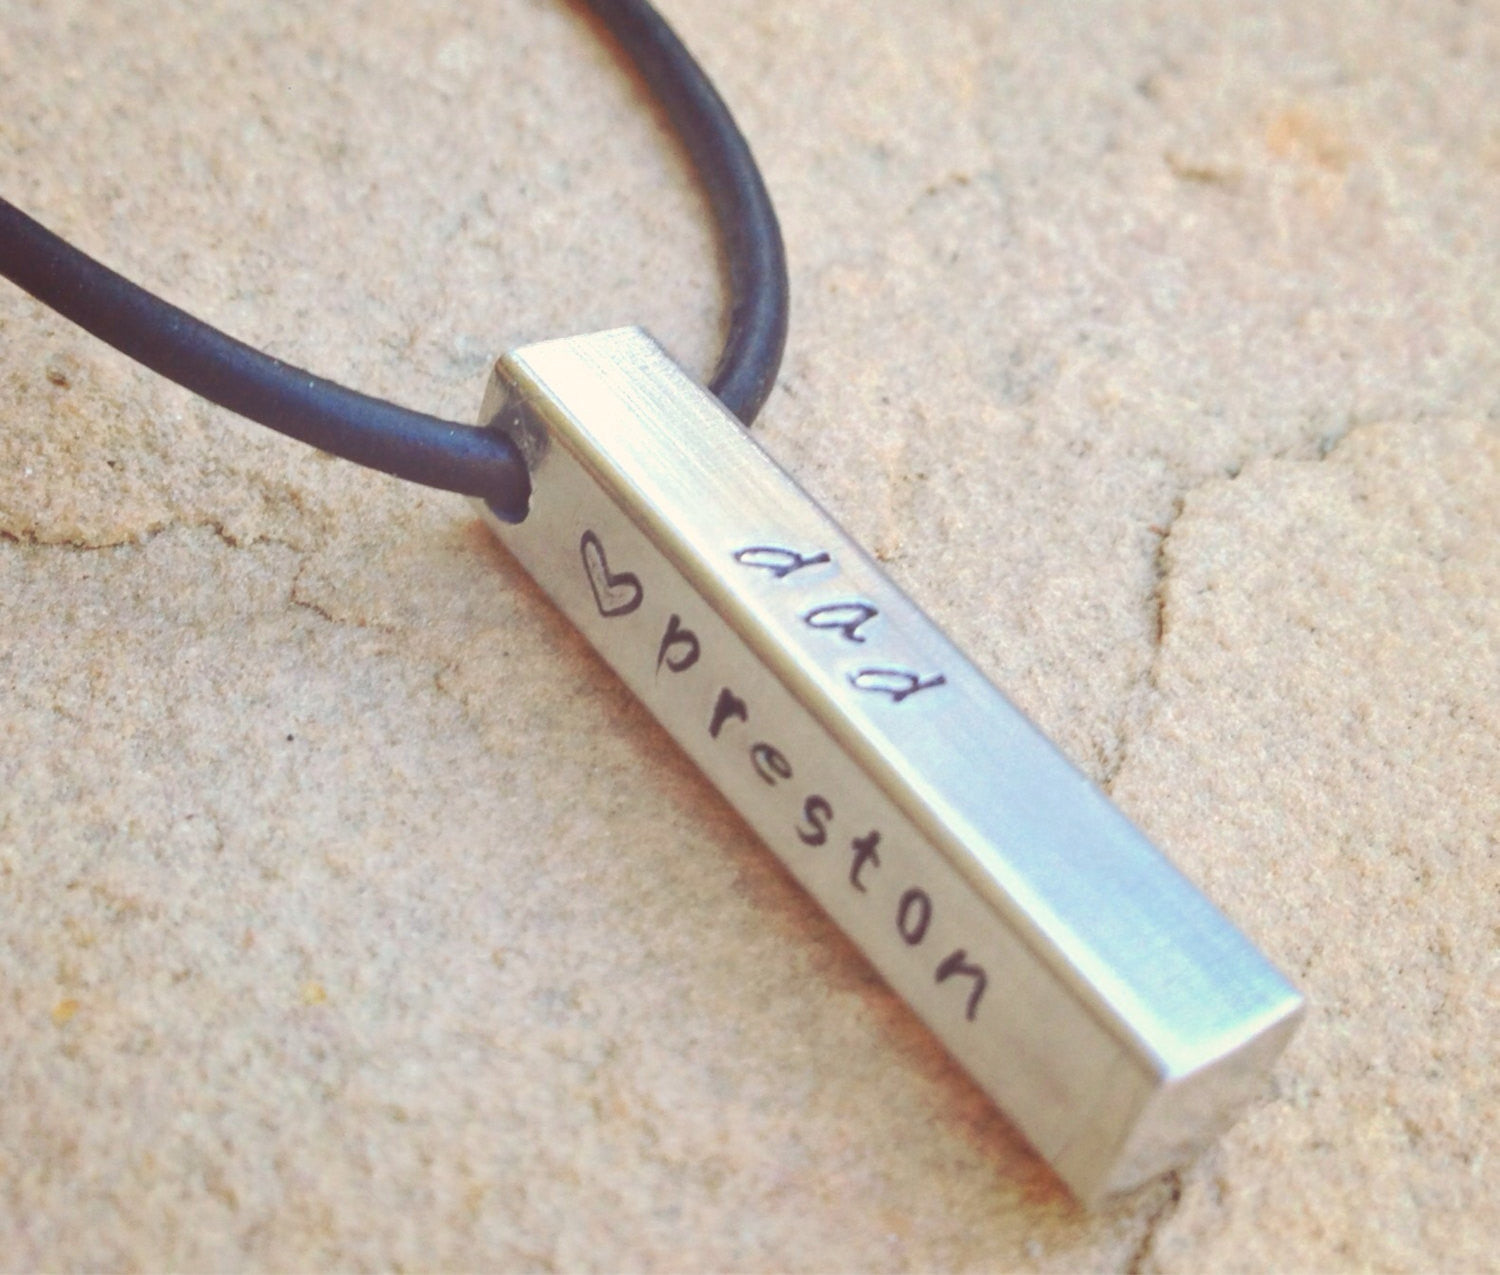 Men's Bar Necklace, Christmas Gifts For Dad, Personalized Dad Necklace - Natashaaloha, jewelry, bracelets, necklace, keychains, fishing lures, gifts for men, charms, personalized, 